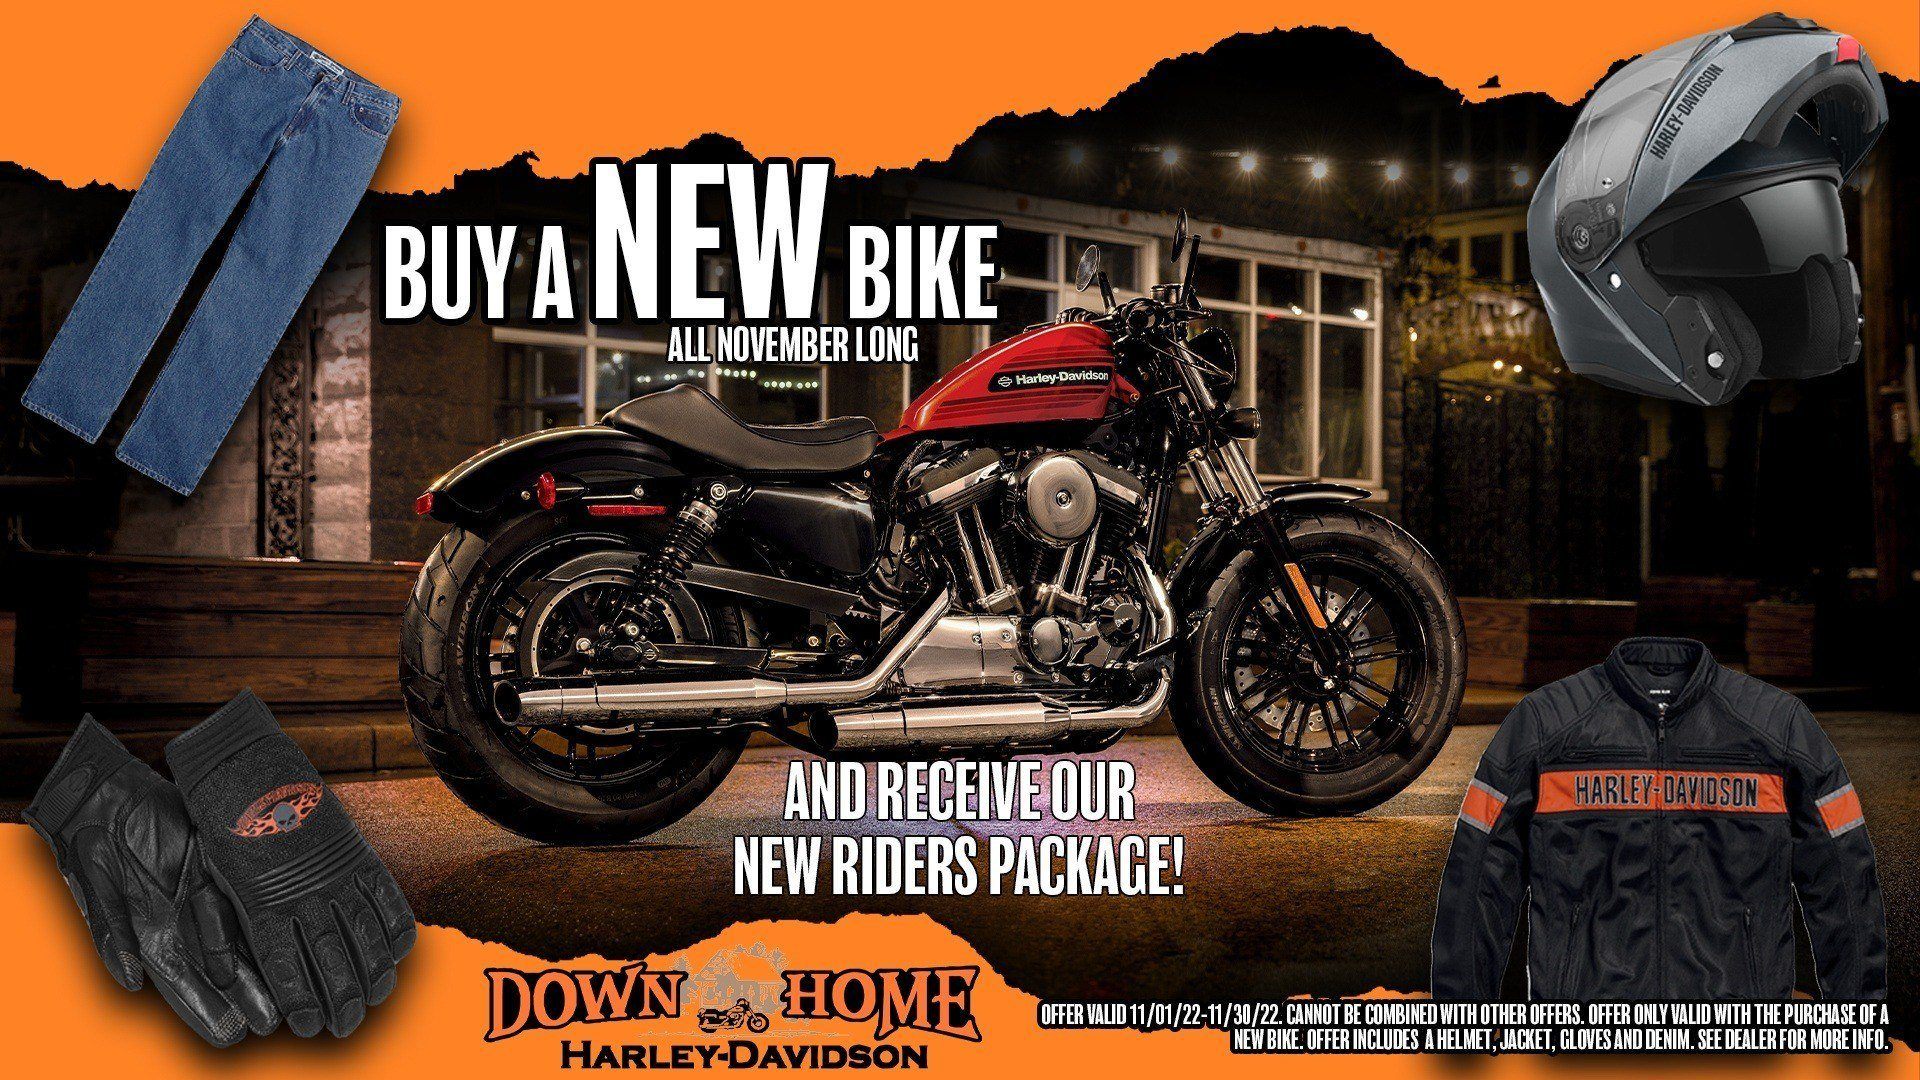 Buy a new bike and receive our new riders package